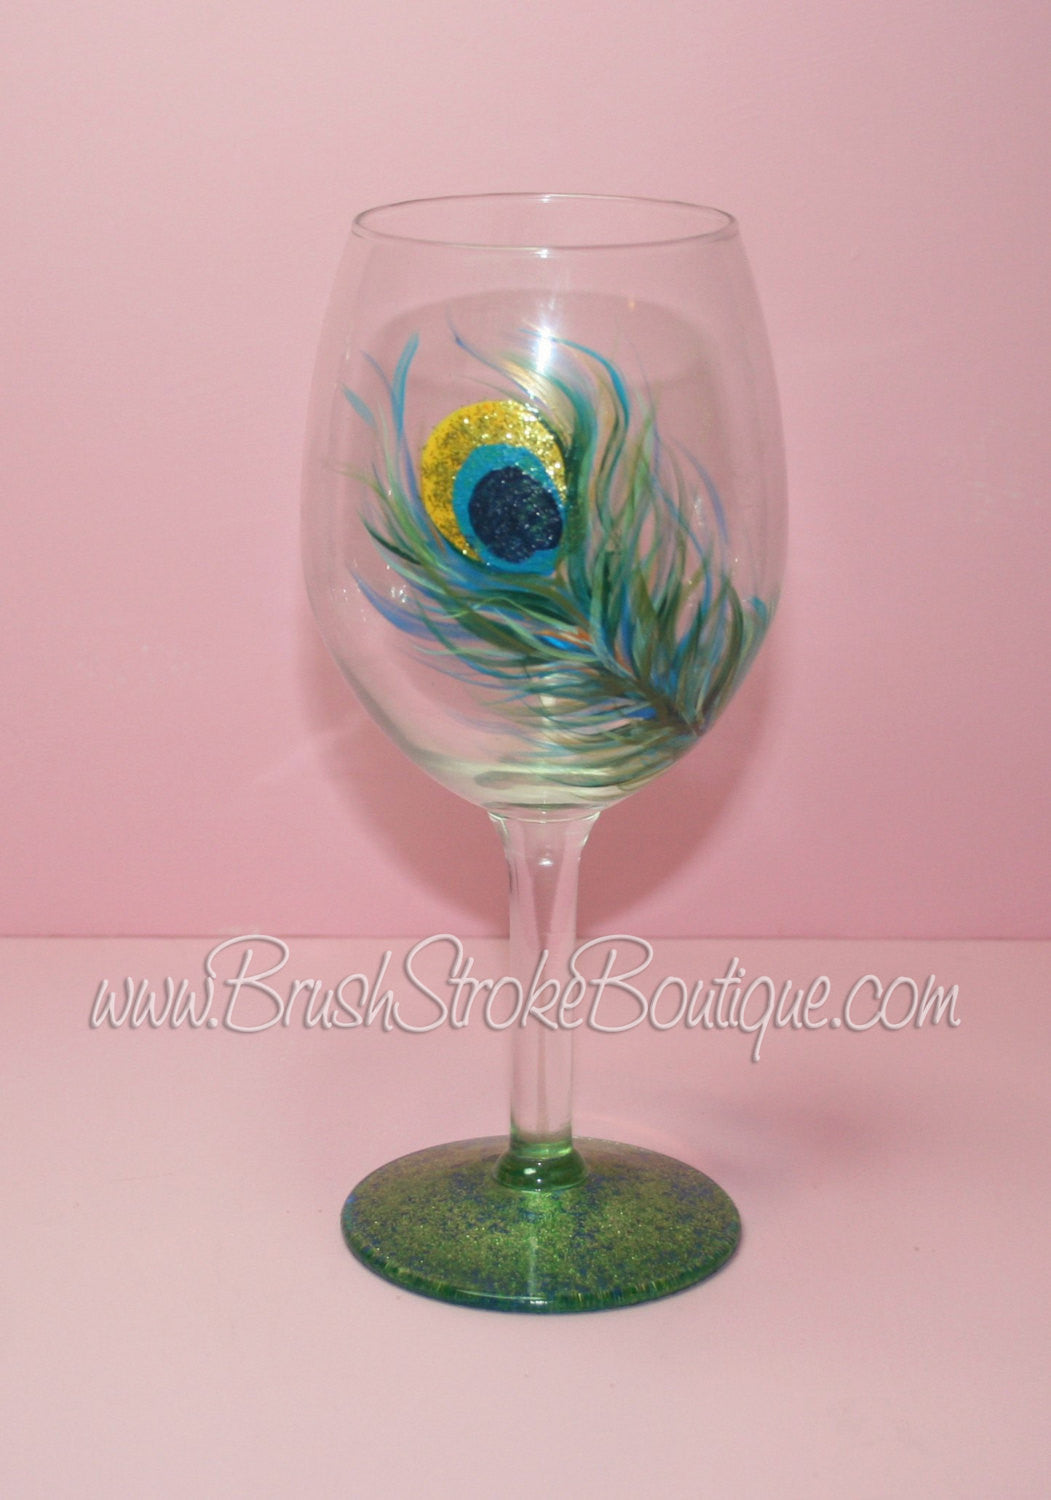 NymphFable Hand-Painted Wine Glass Coloured Peacock Artisan Painted 15oz Personalised Gift for Best Friend